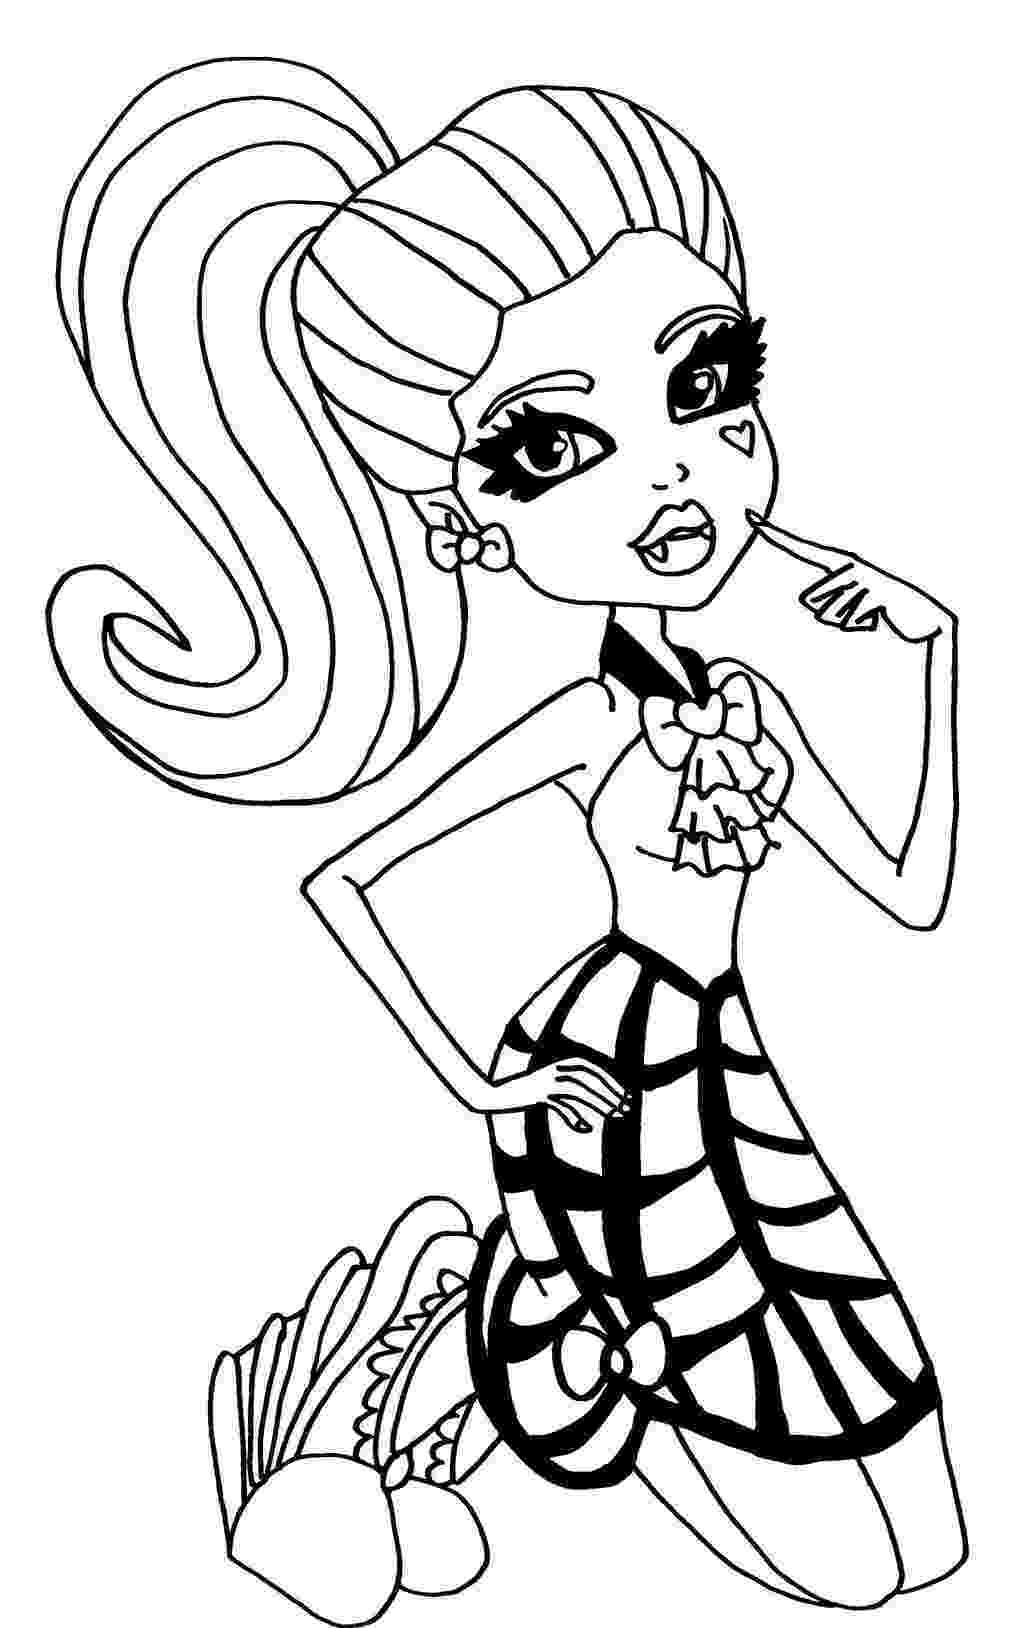 free coloring pages monster high monster high draculaura coloring page monster high free high coloring pages monster 